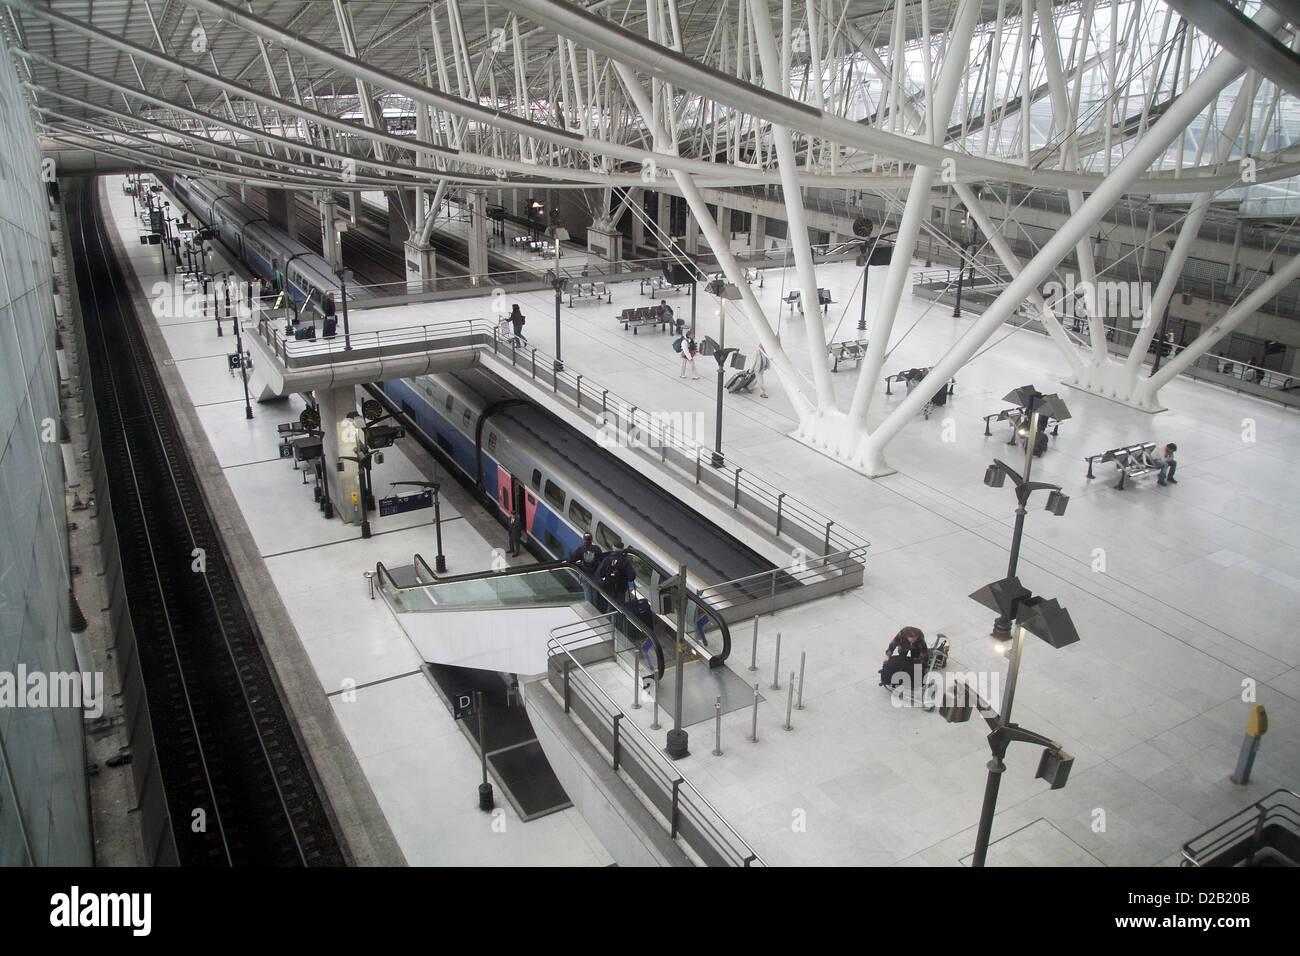 Paris, France, the RER station at Charles de Gaulle Airport Stock Photo